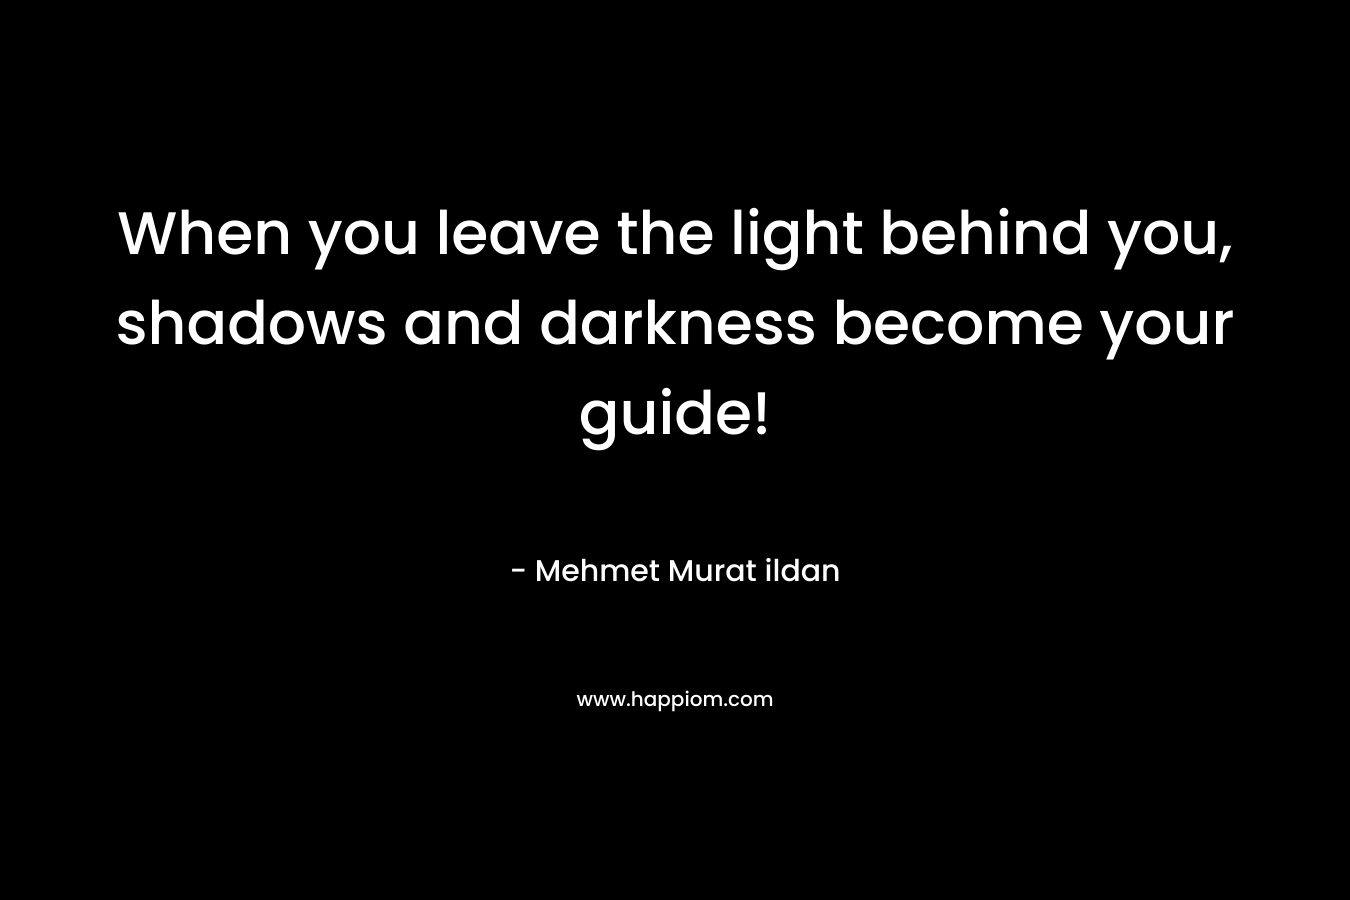 When you leave the light behind you, shadows and darkness become your guide!